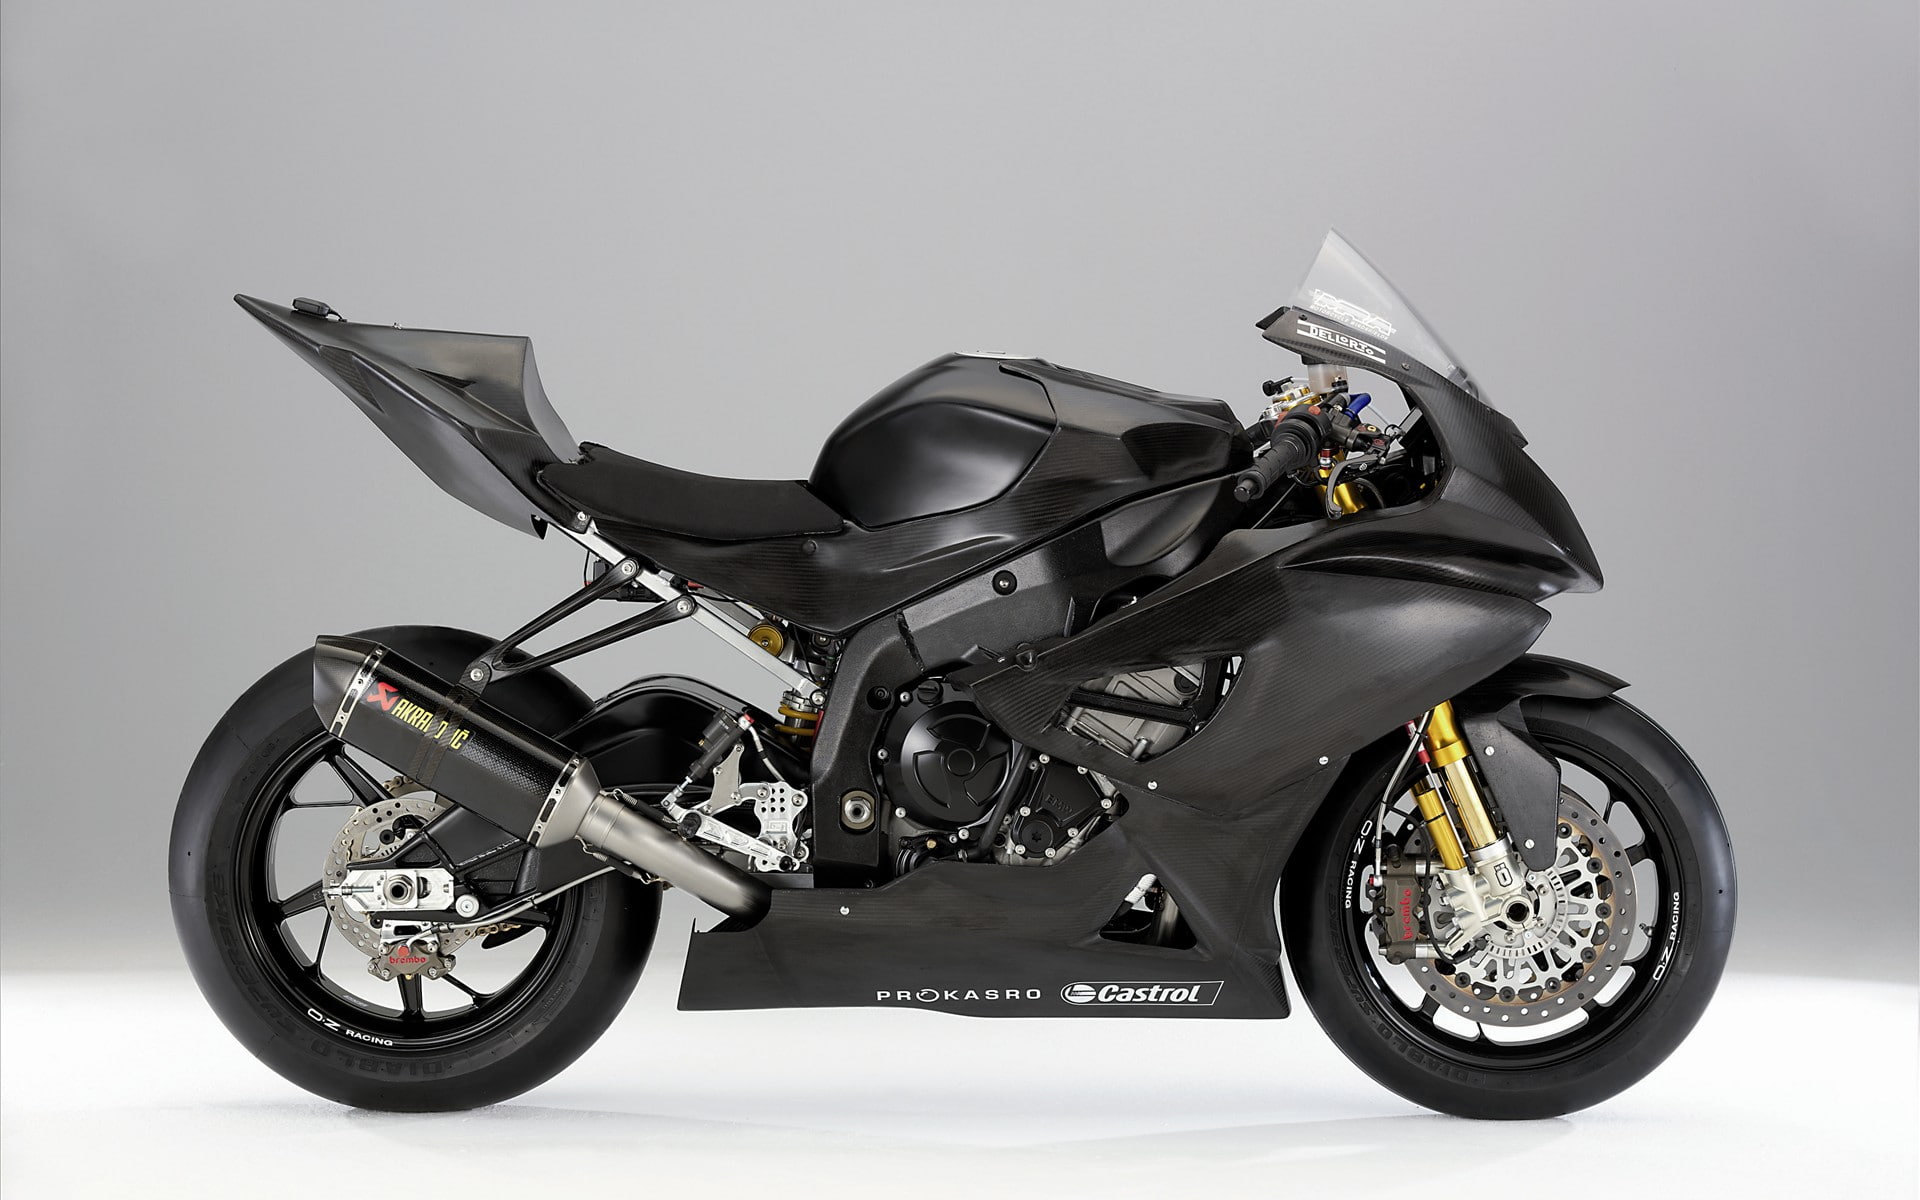 BMW S 1000 RR Black HD, bikes, motorcycles, bikes and motorcycles